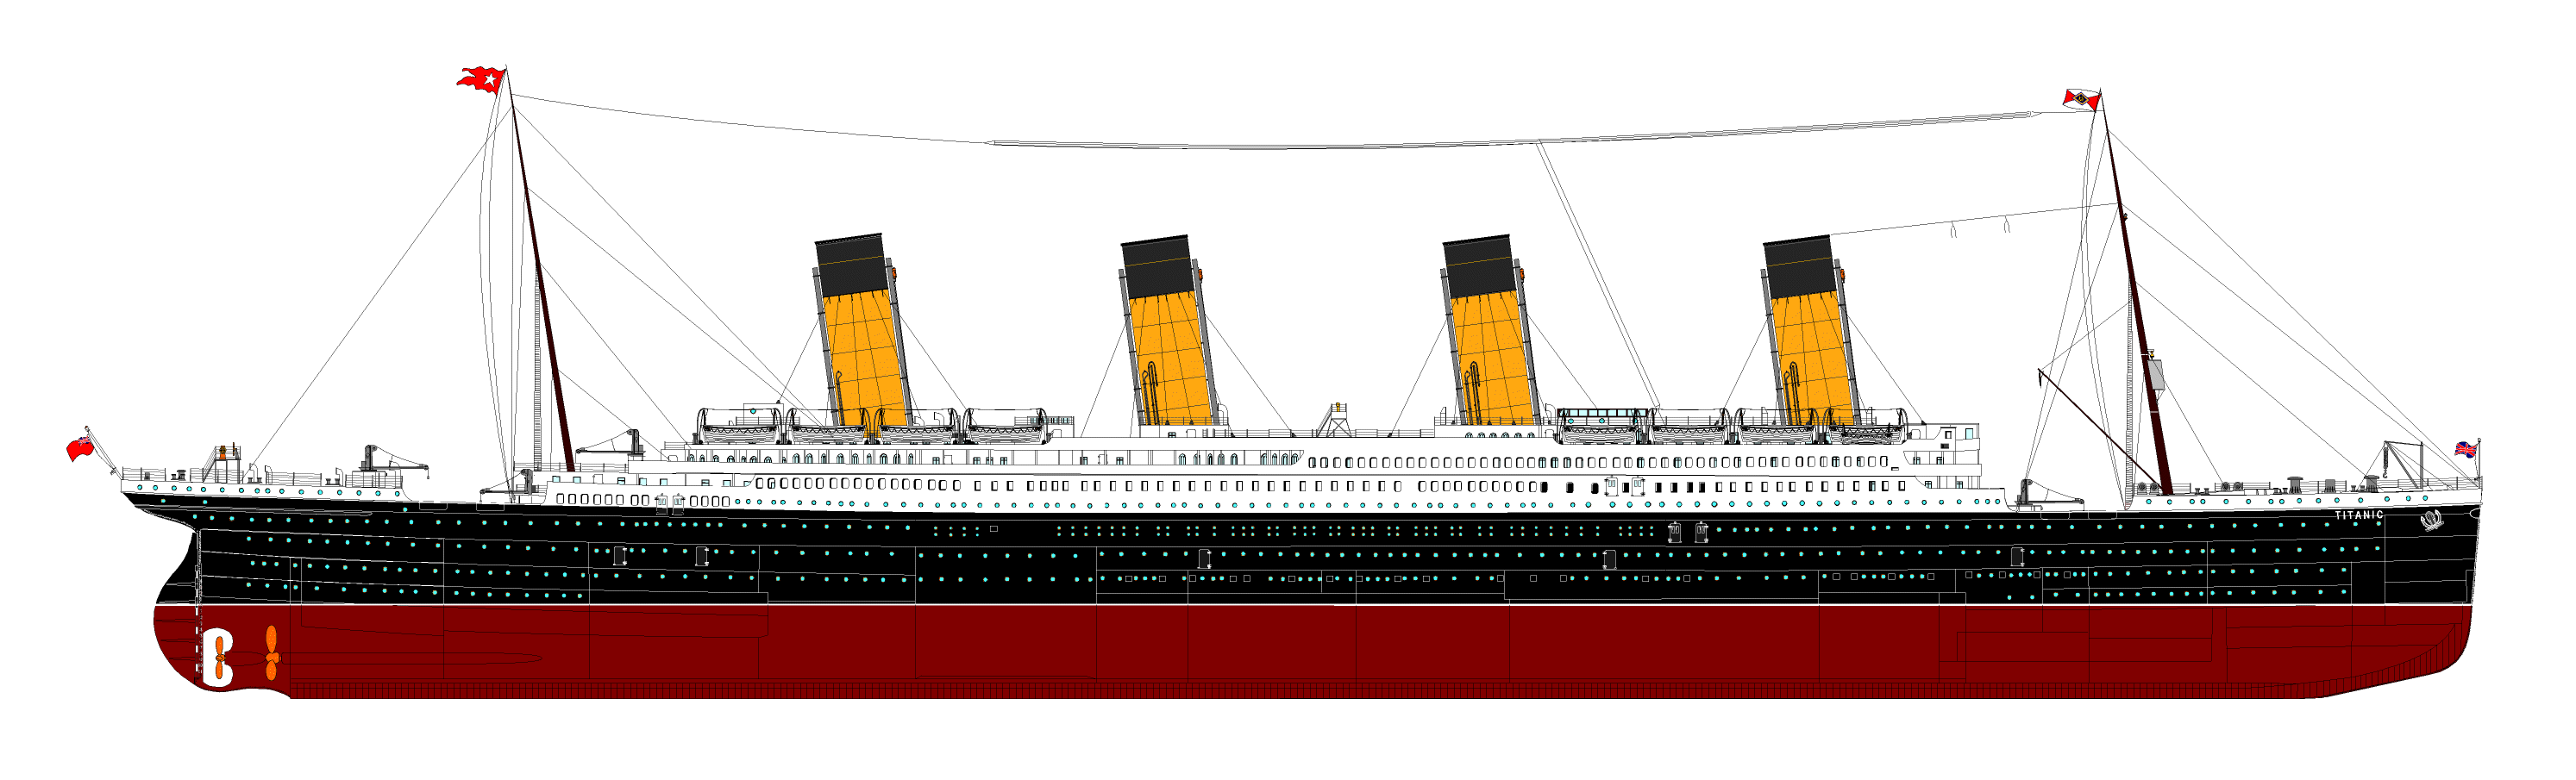 Exploring Survival on the Titanic with Machine Learning |